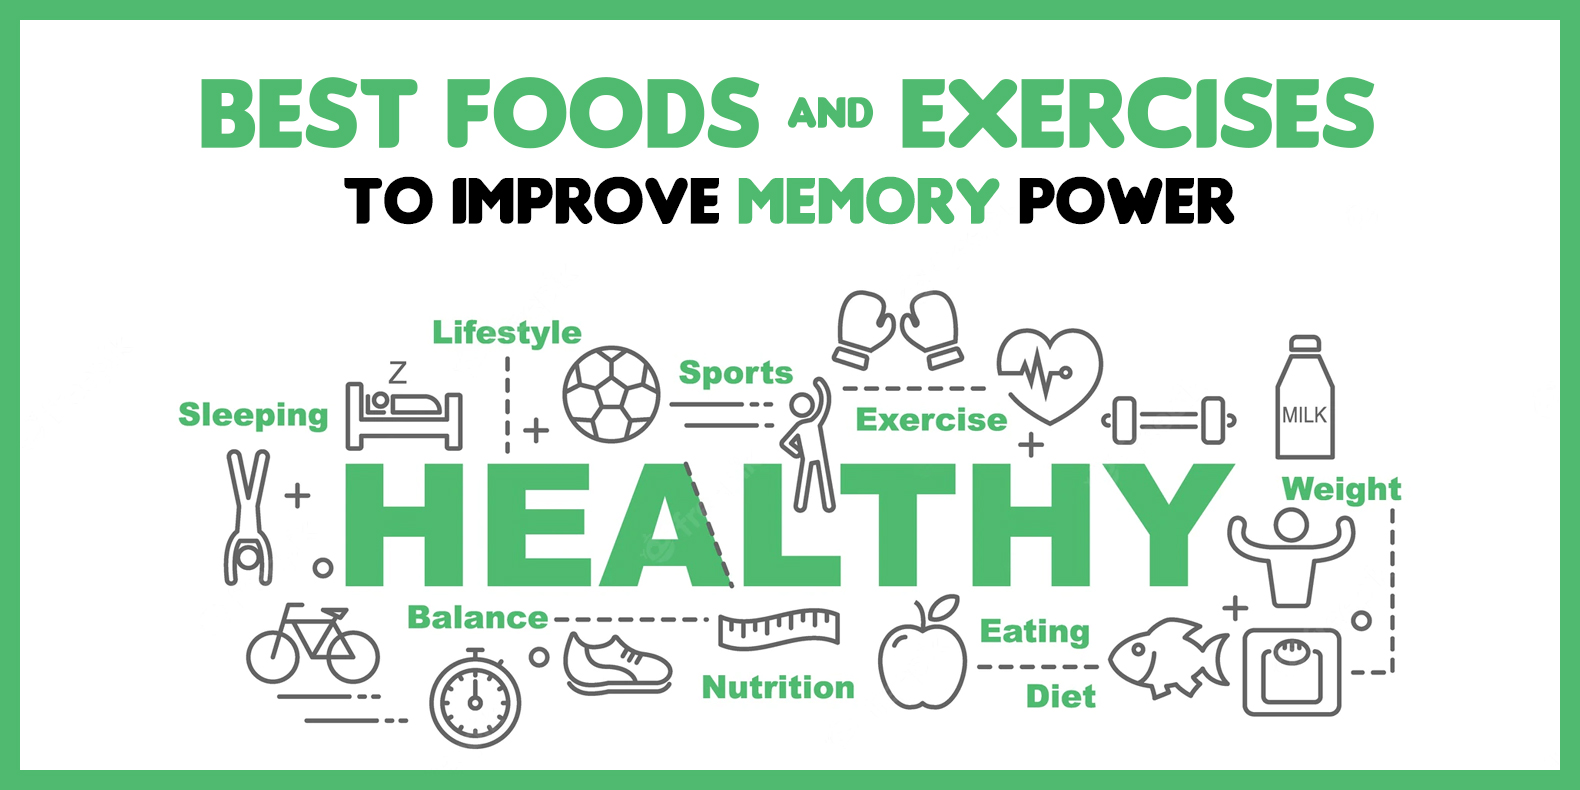 Best Foods & Exercises to improve Memory Power – A Complete Guide to Follow